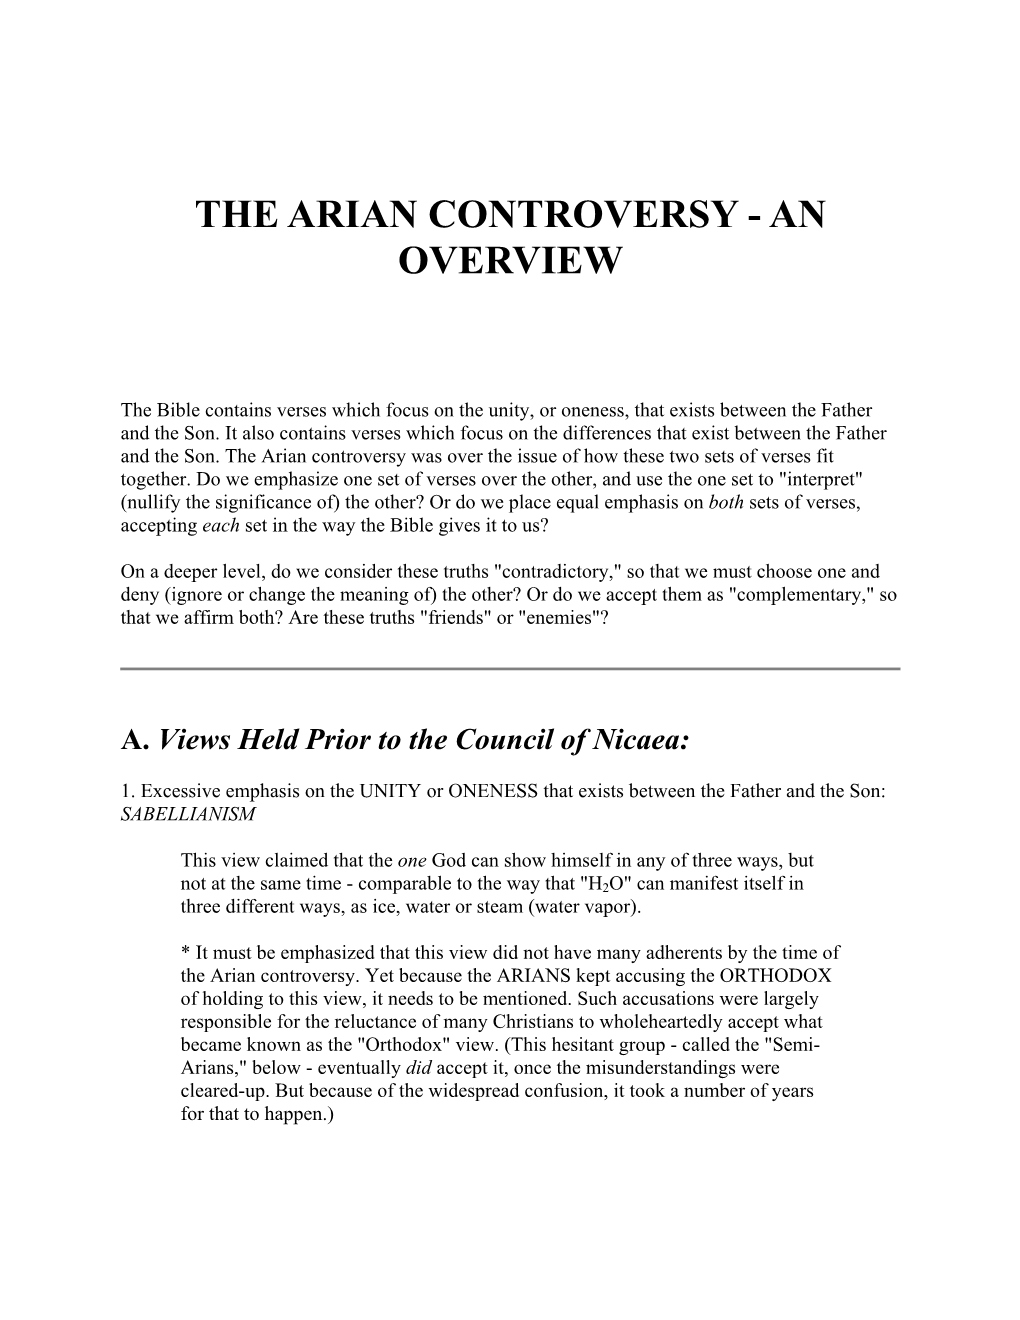 The Arian Controversy - an Overview